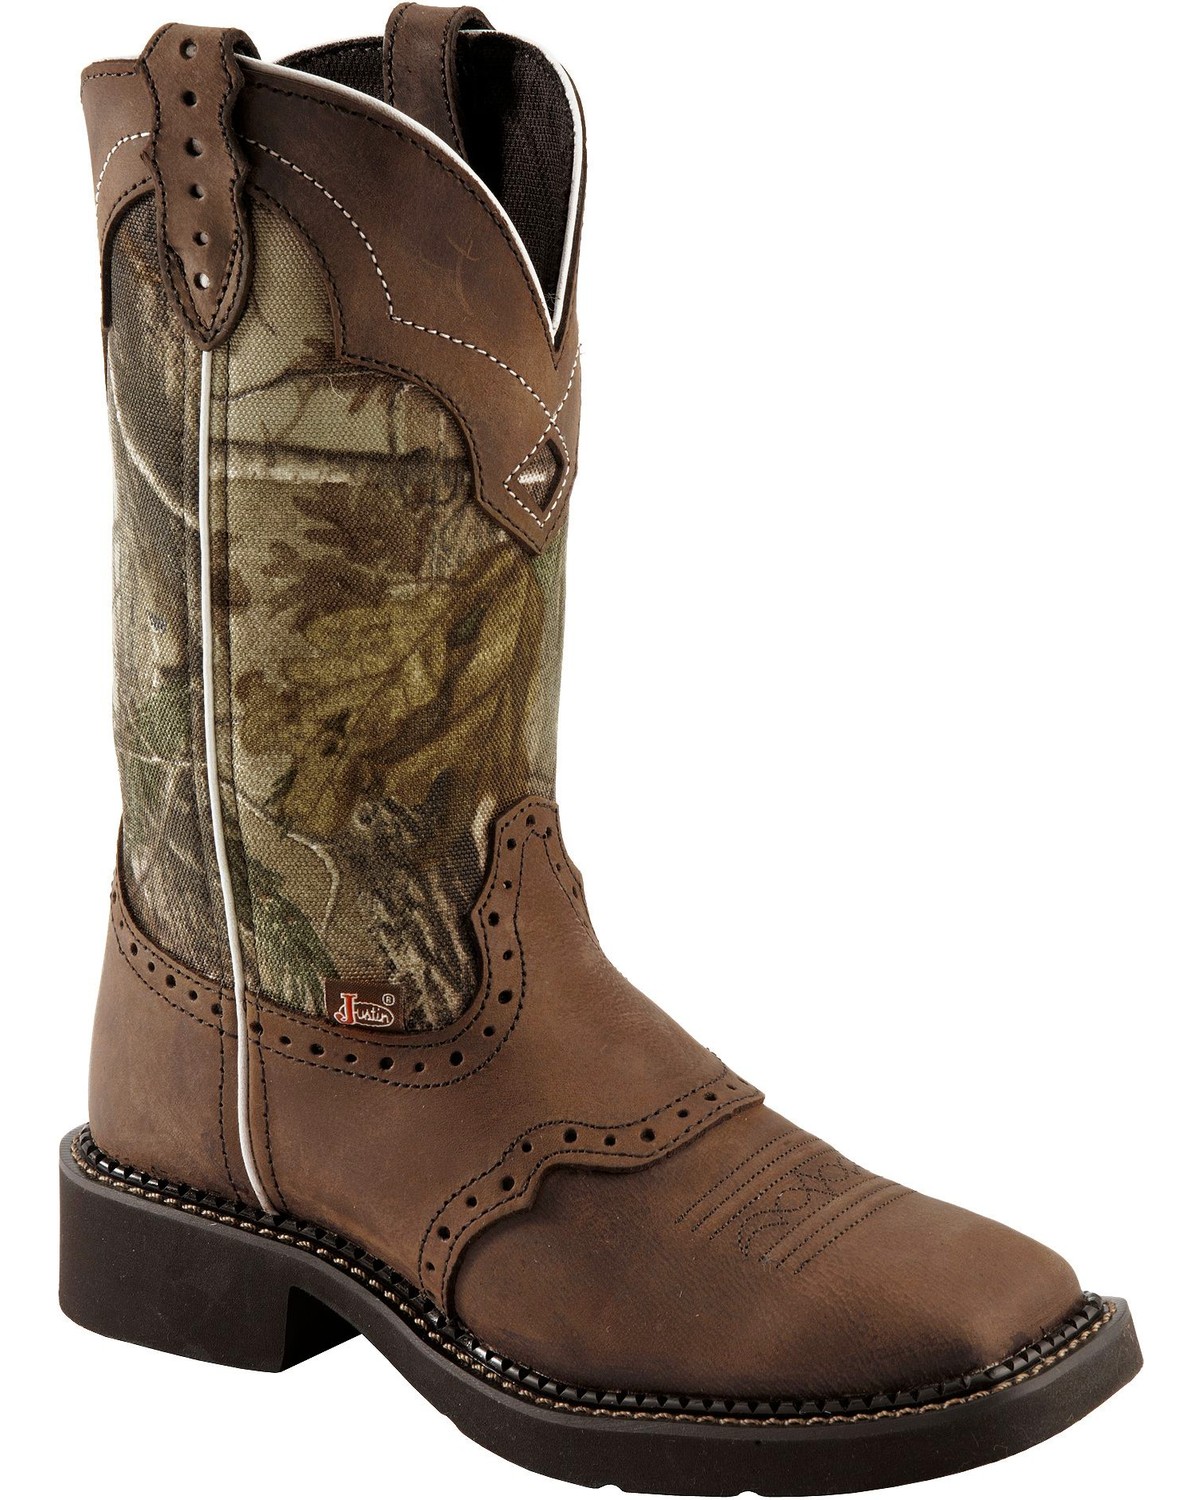 justin gypsy women's square toe western boots